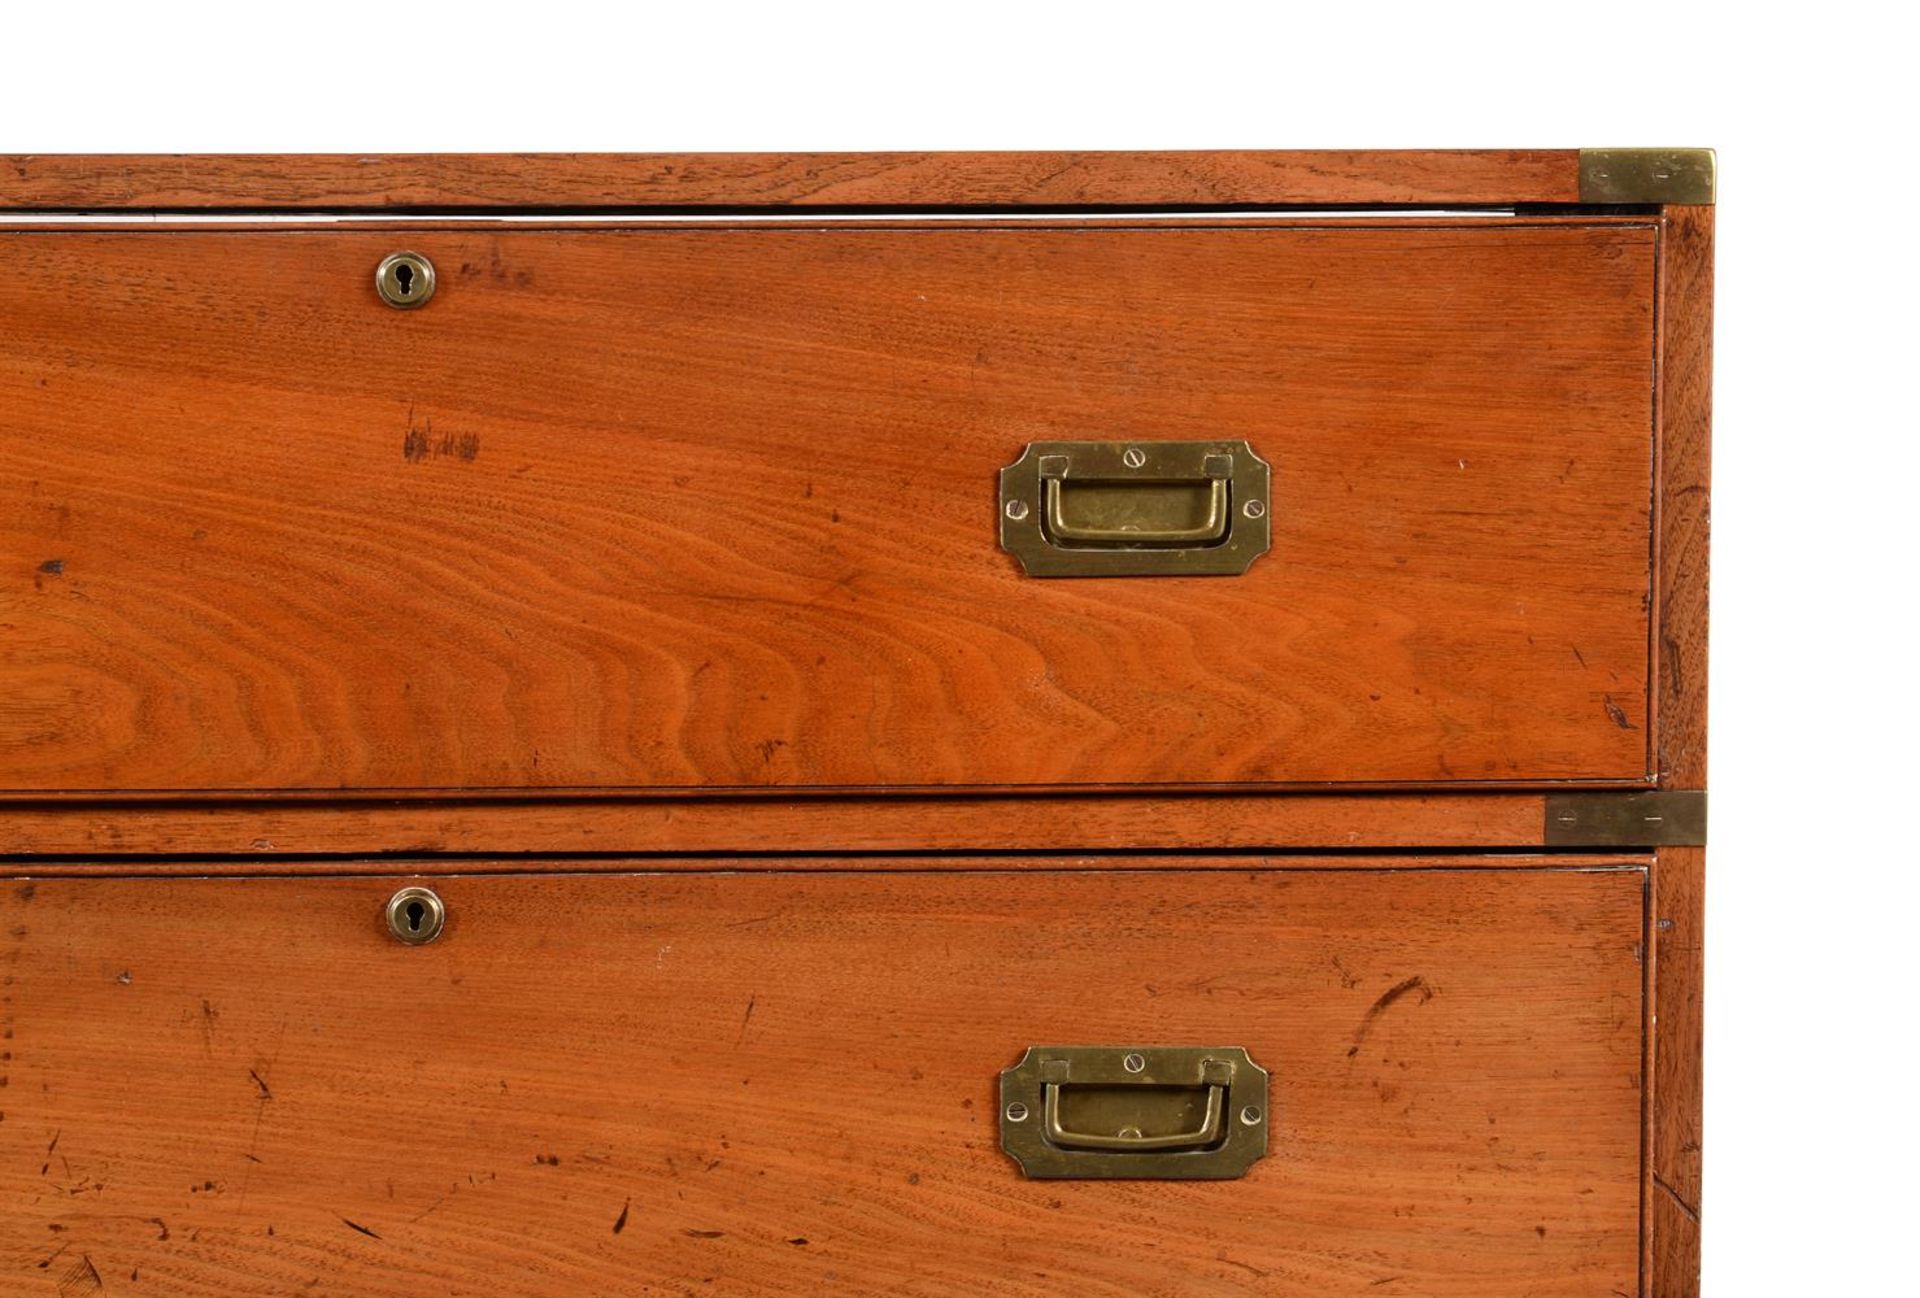 A VICTORIAN TEAK AND BRASS BOUND SECRETAIRE CAMPAIGN CHEST, BY T WHITE & CO, MID 19TH CENTURY - Image 2 of 6